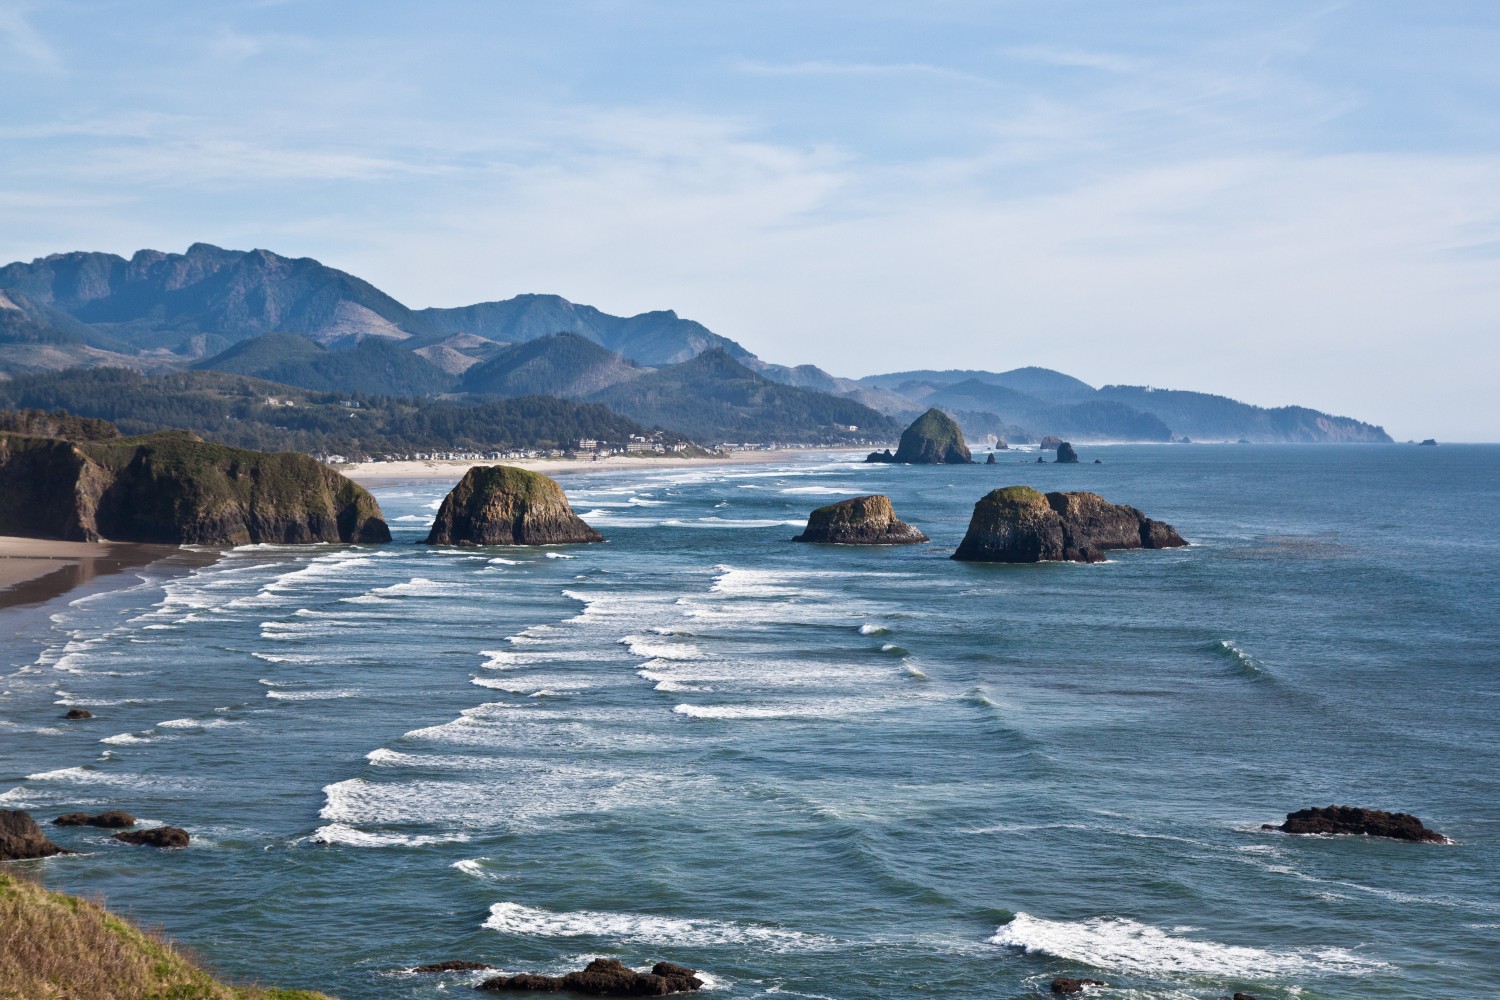 A view of the Oregon coastline approaching Cannon Beach.